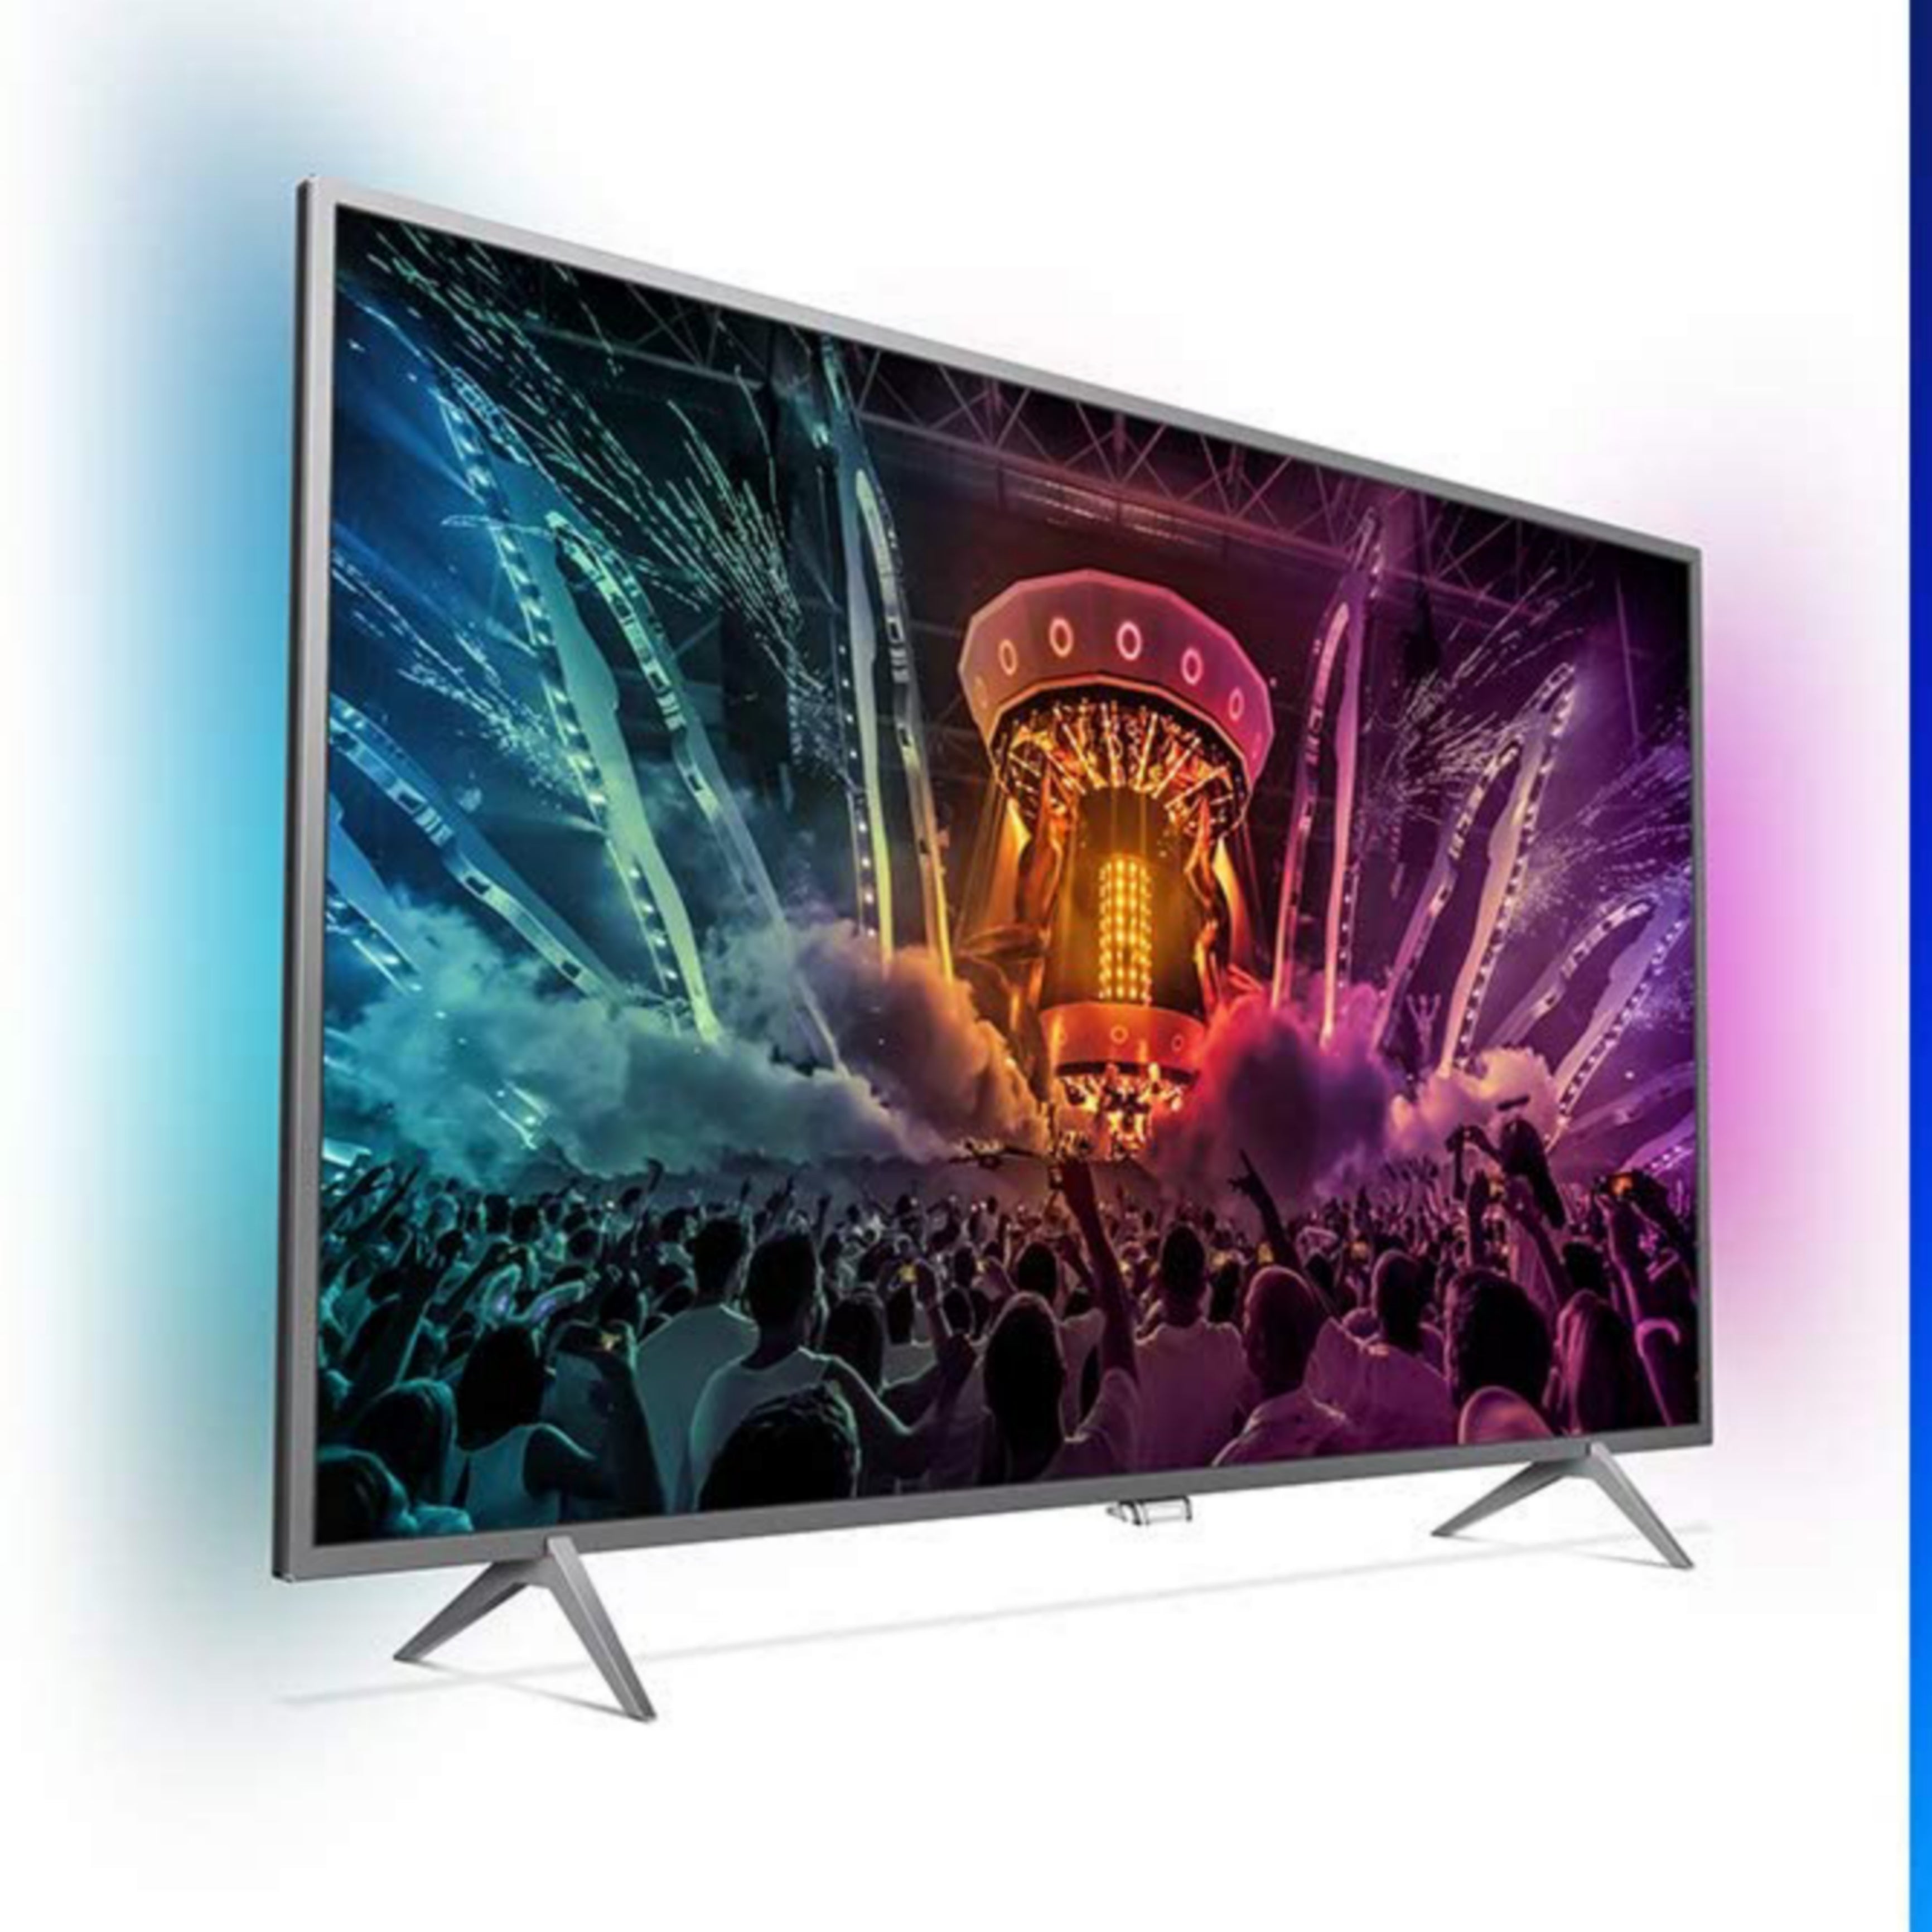 PHILIPS FOREIGN USED TVS – IFESOLOX